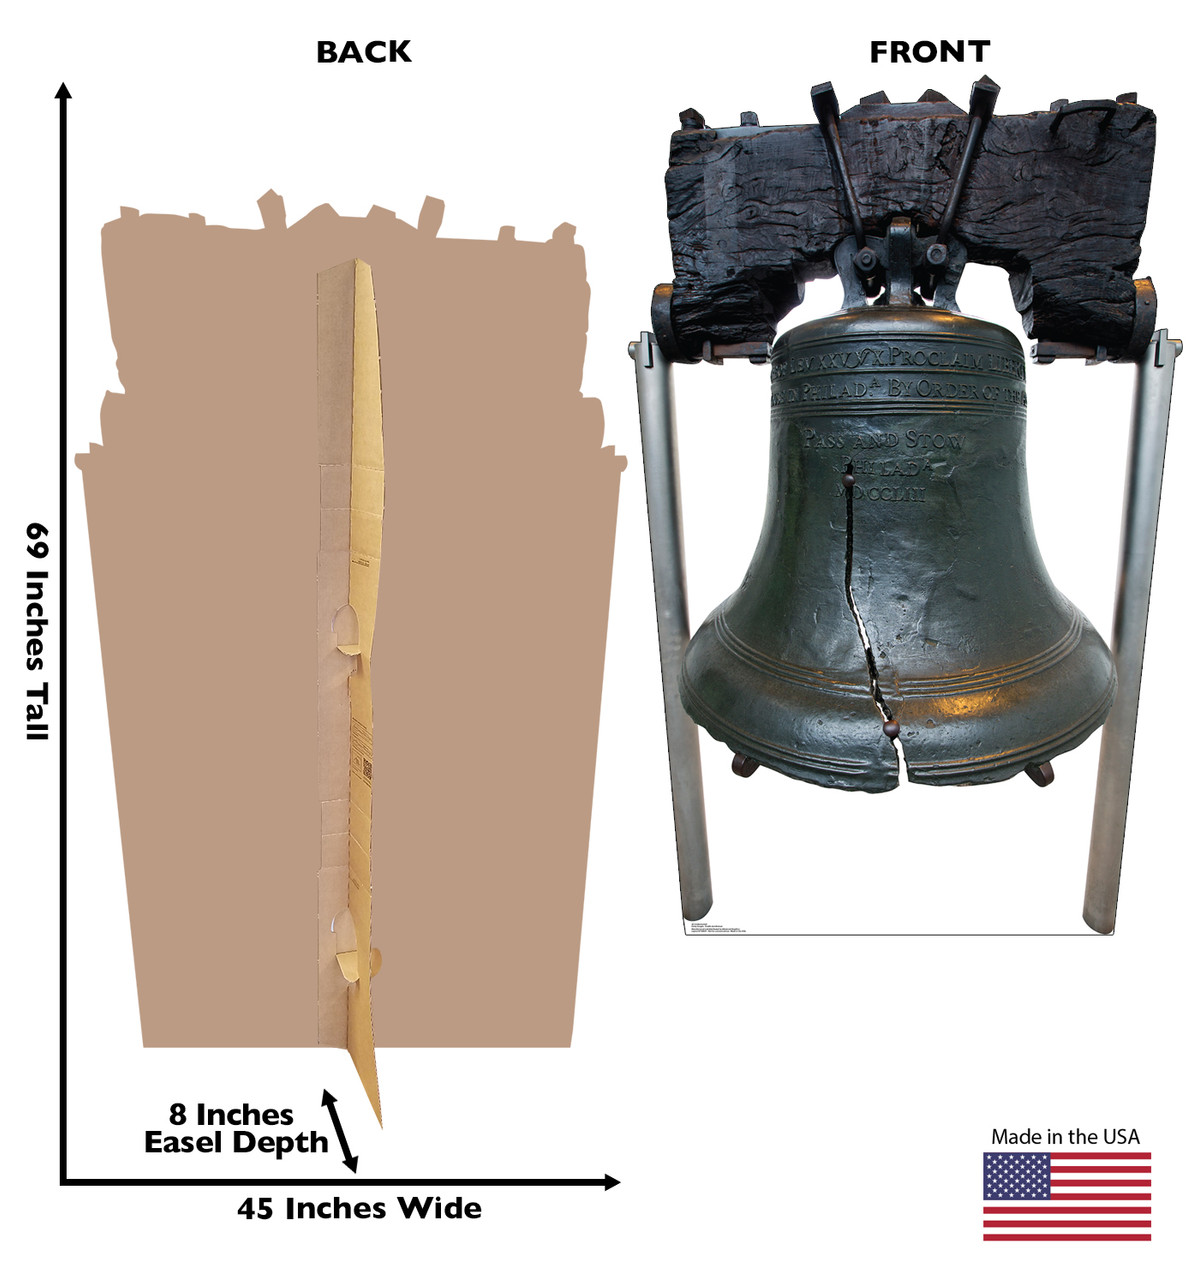 Life-size cardboard standee of the Liberty Bell with front and back dimensions.